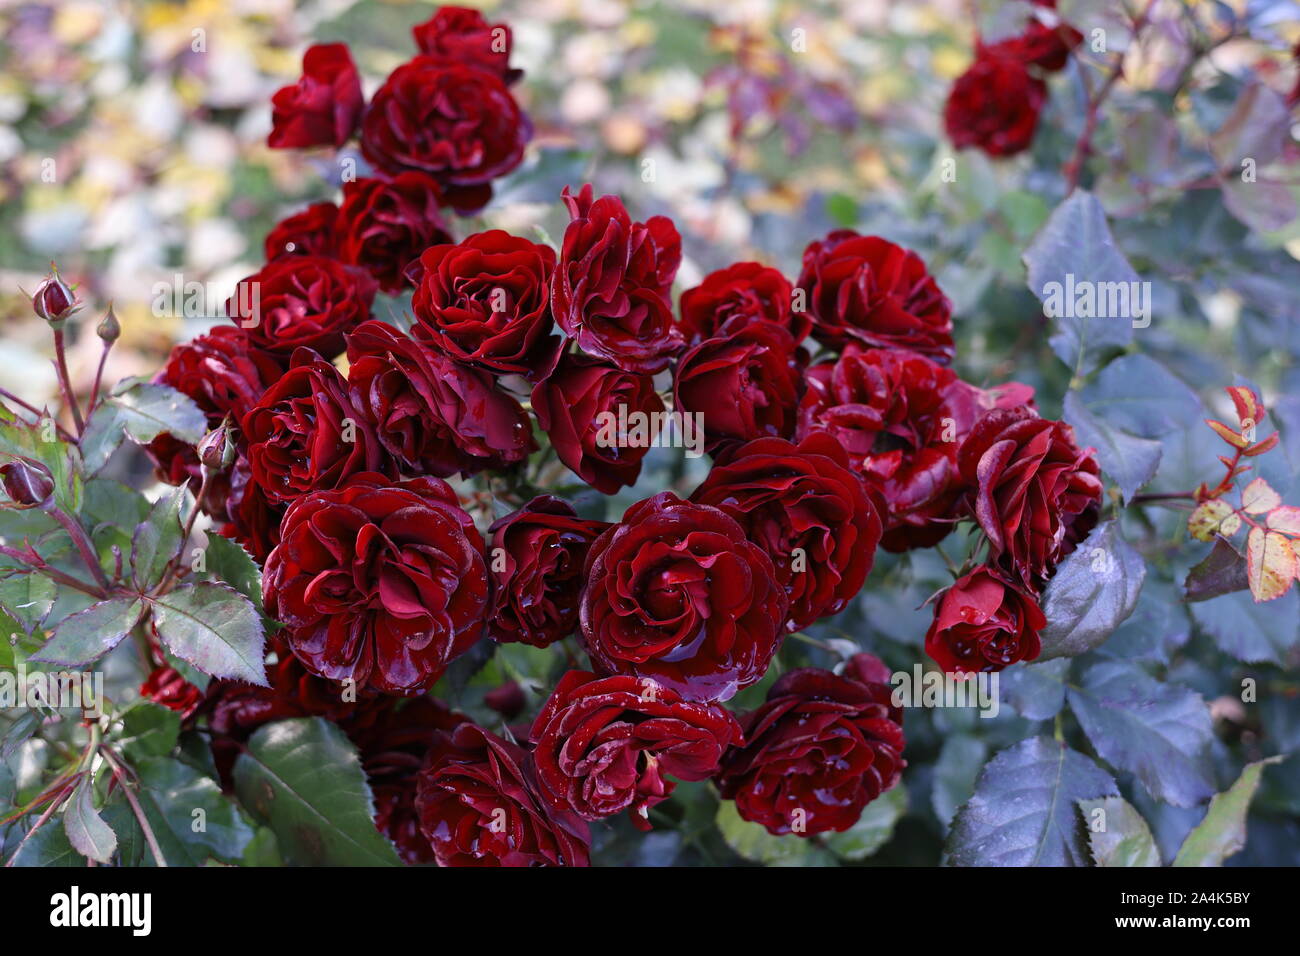 Beautiful blood red roses in the garden. Rain drops like crystals on the petals. Romantic background photo. Wedding, Valentines day, dreamy mood. Stock Photo